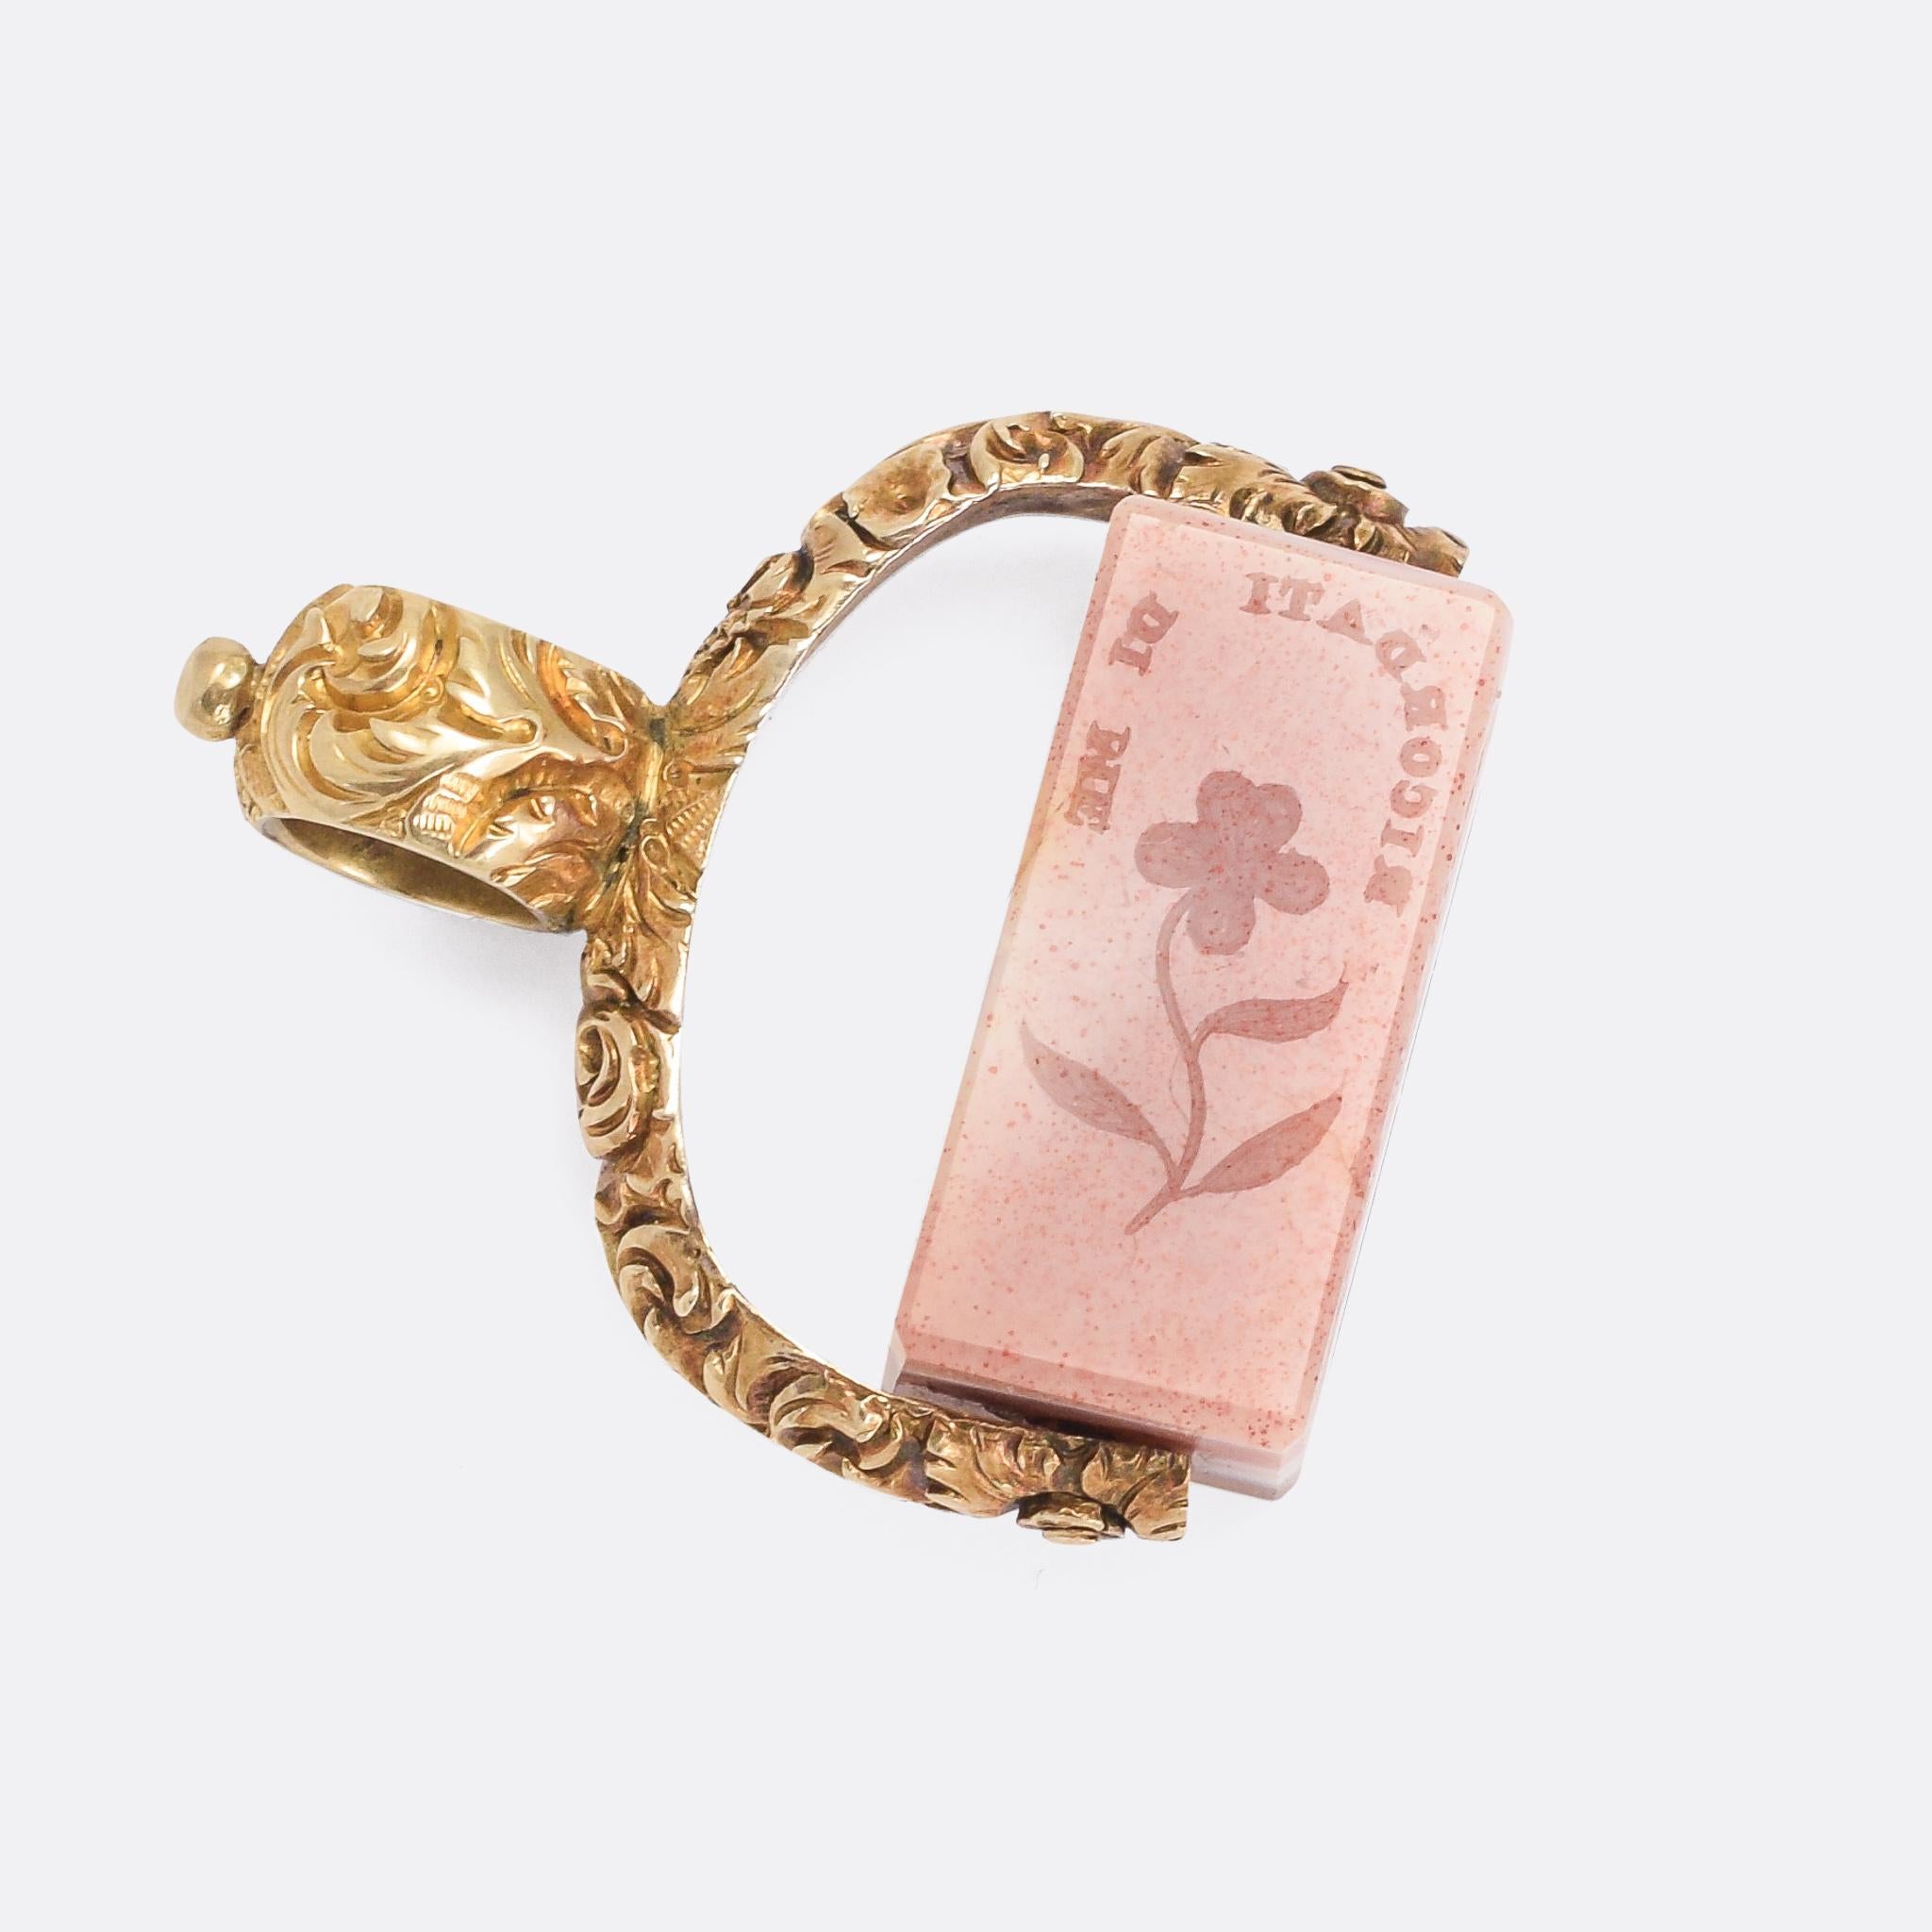 A very peculiar early Victorian spinner fob dating from the 1840s. The cuboid agate spins freely within the gold frame, and features intaglio seal carvings to each of the four faces. They include various French and Italian sentimental messages: